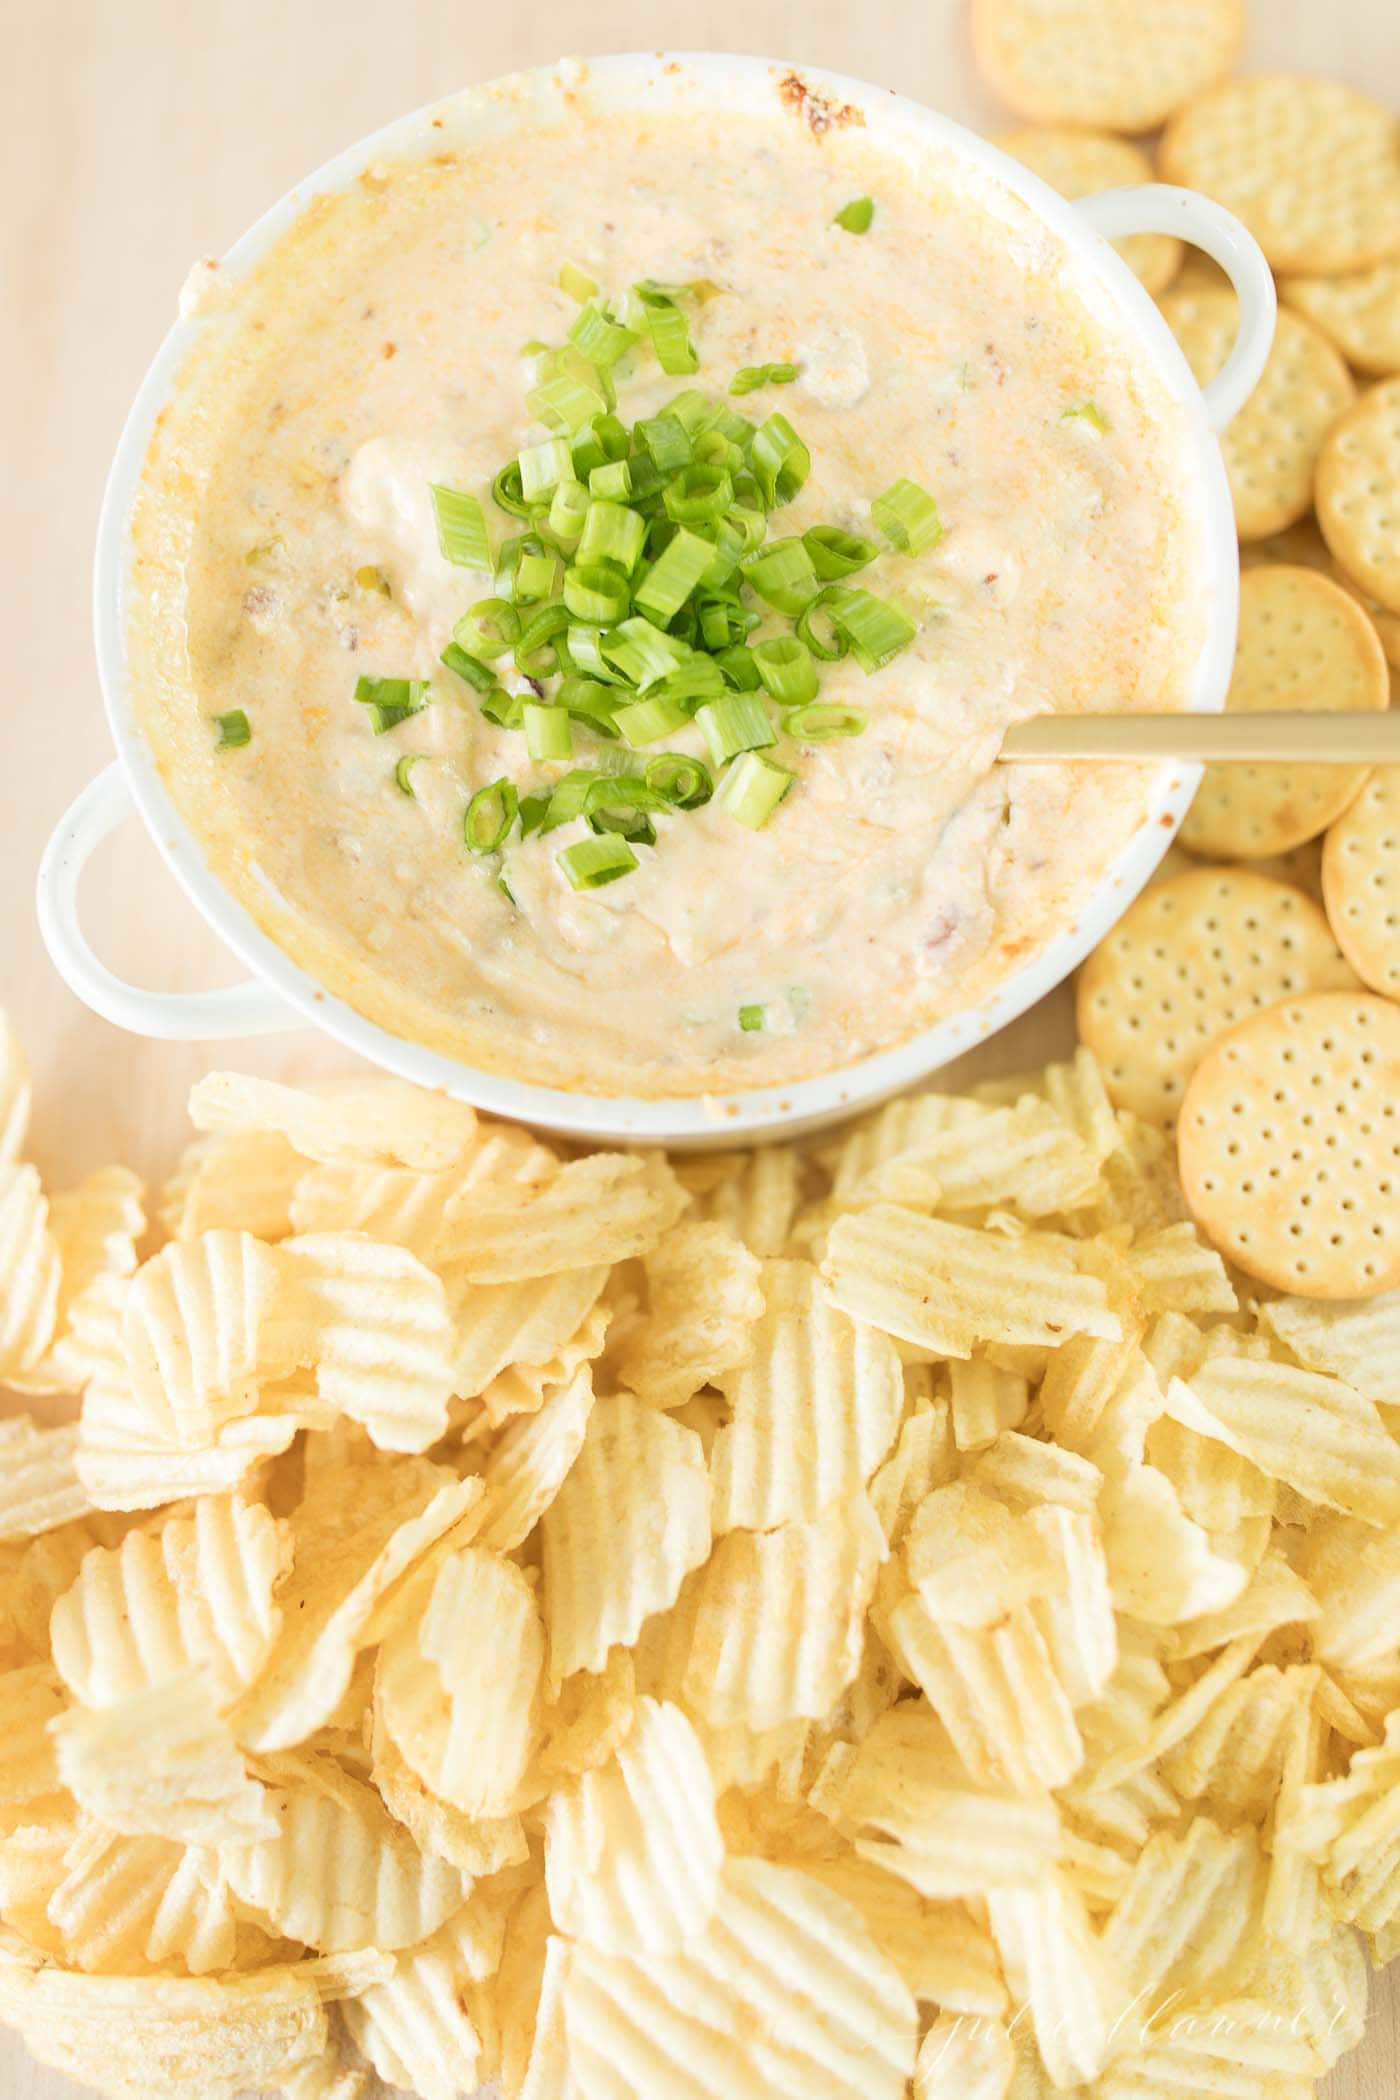 Cheesy bacon dip garnished with green onions surrounded by crackers and chips